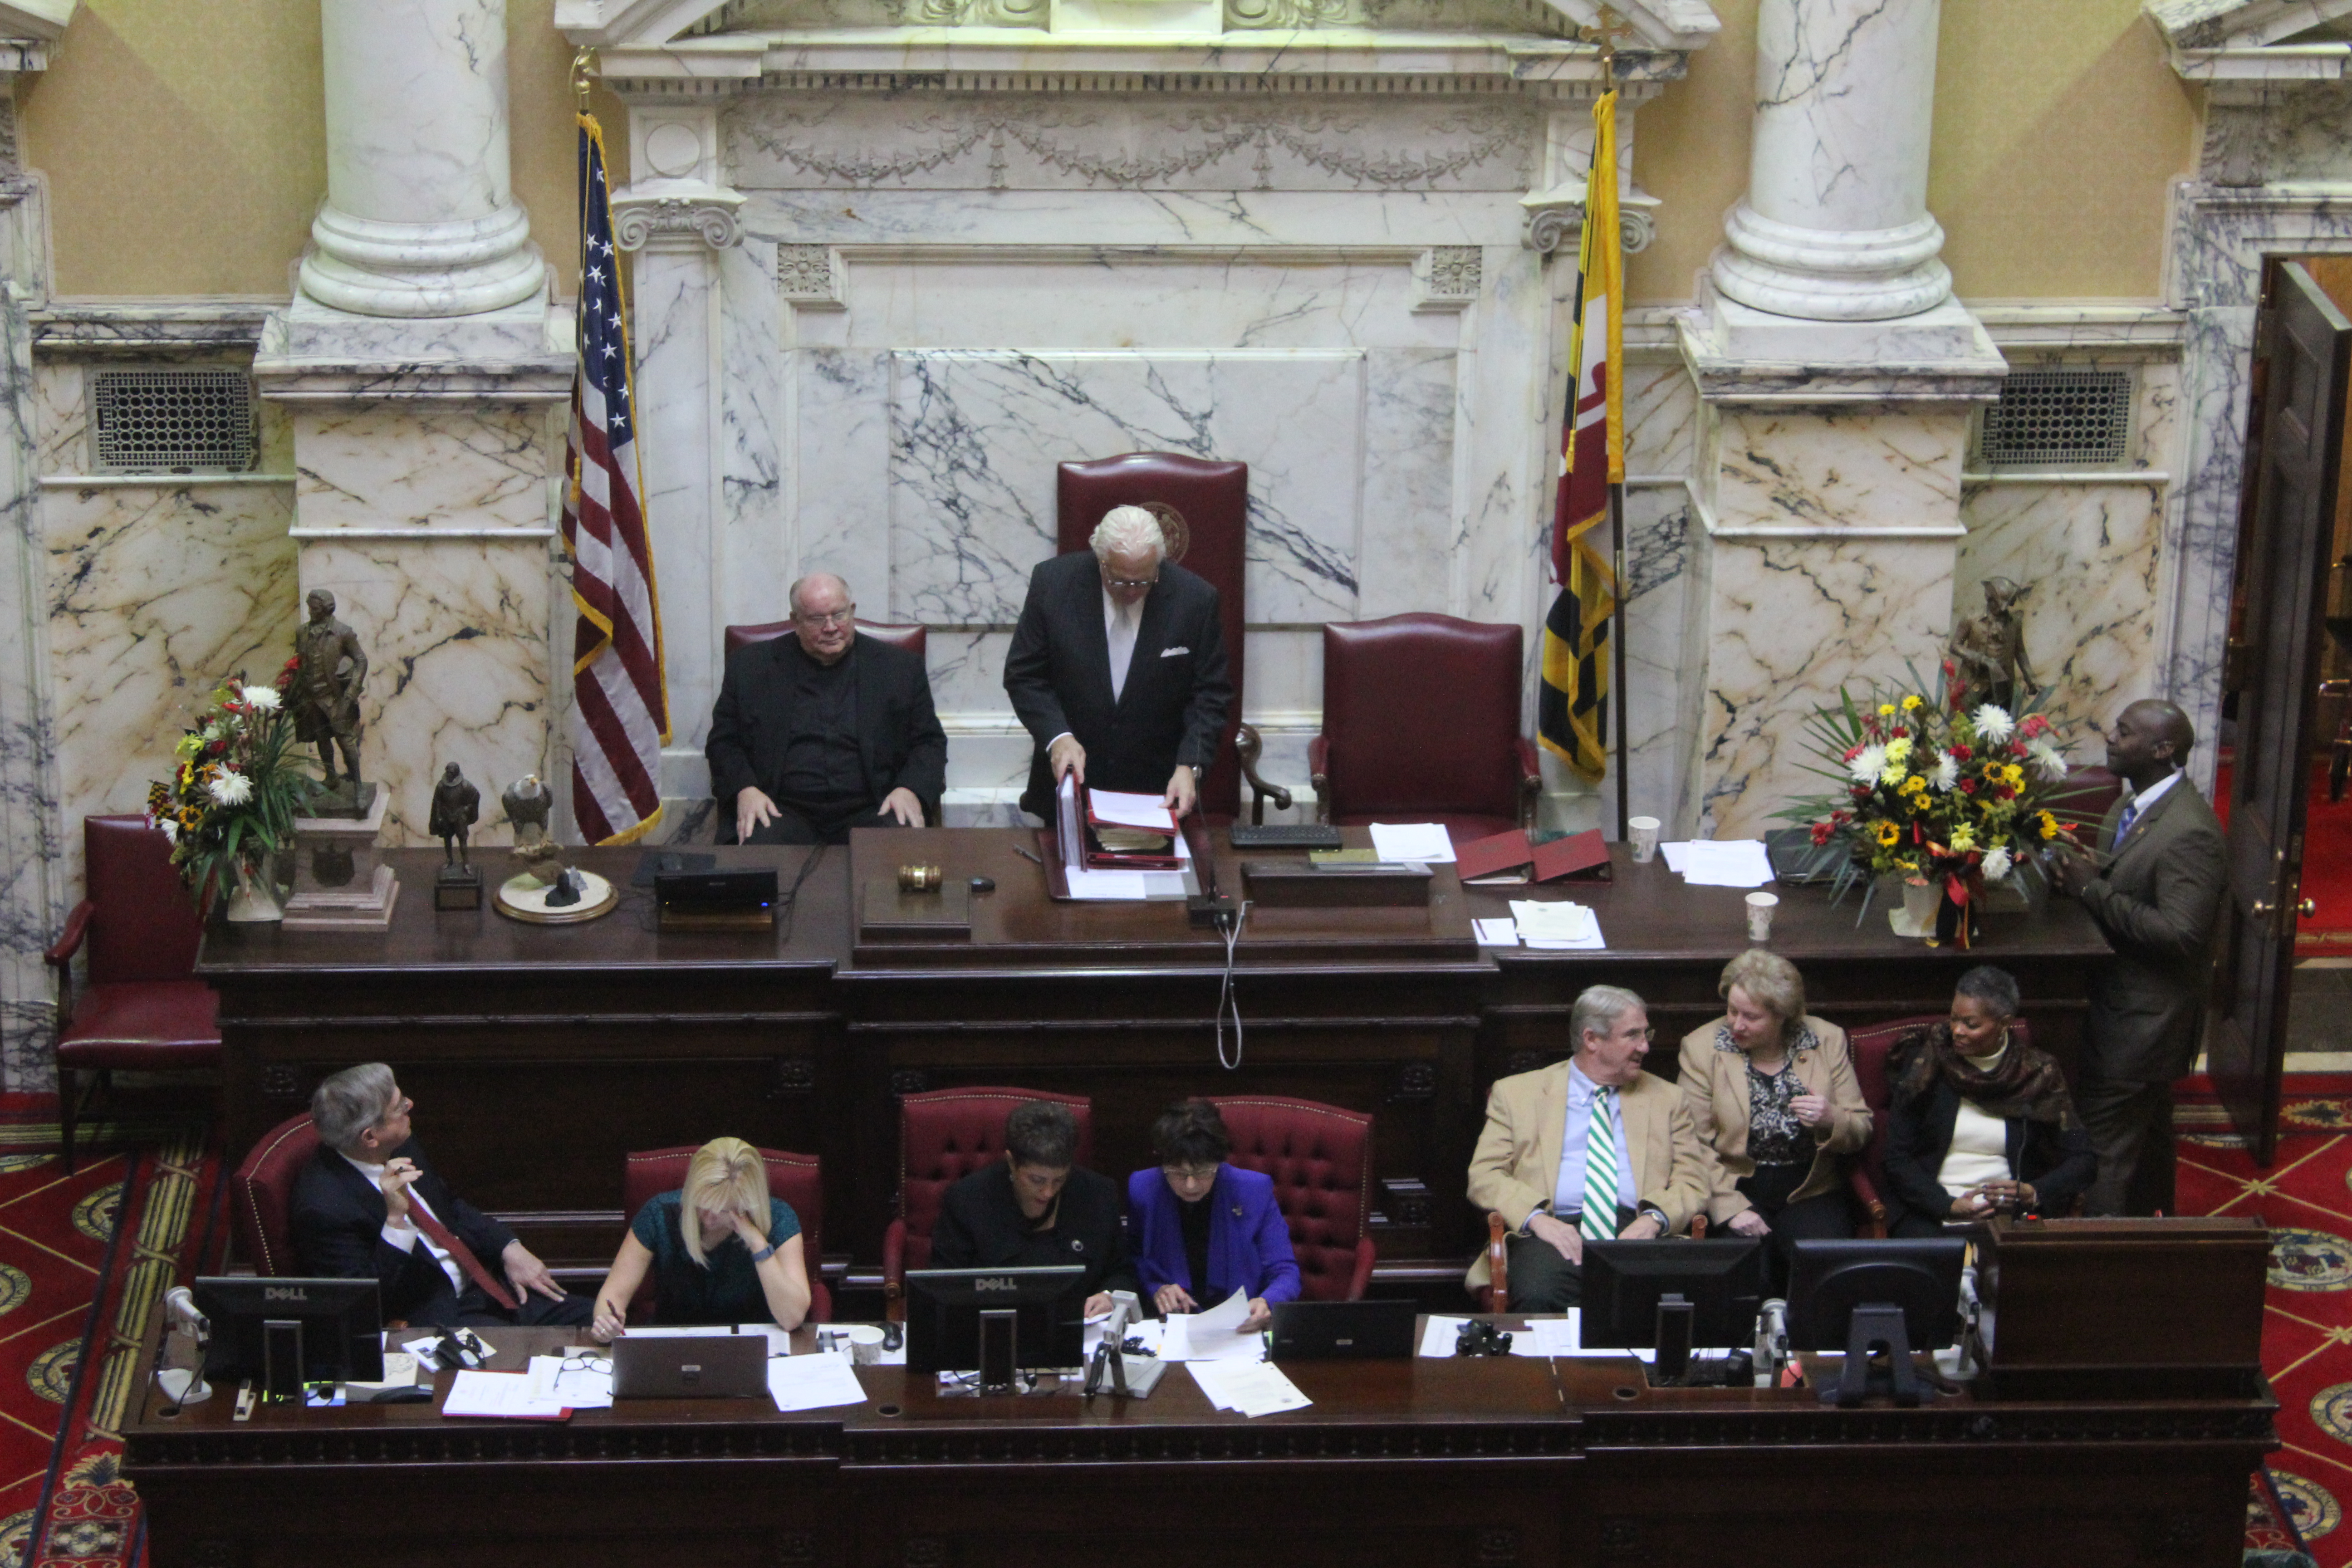 Senate President Thomas V. Mike Miller Jr., D-Calvert, consults his notes before the Senate considers overriding multiple vetoes from Gov. Larry Hogan in Annapolis, Maryland, on January 21, 2016. (Capital News Service photo by Josh Magness)